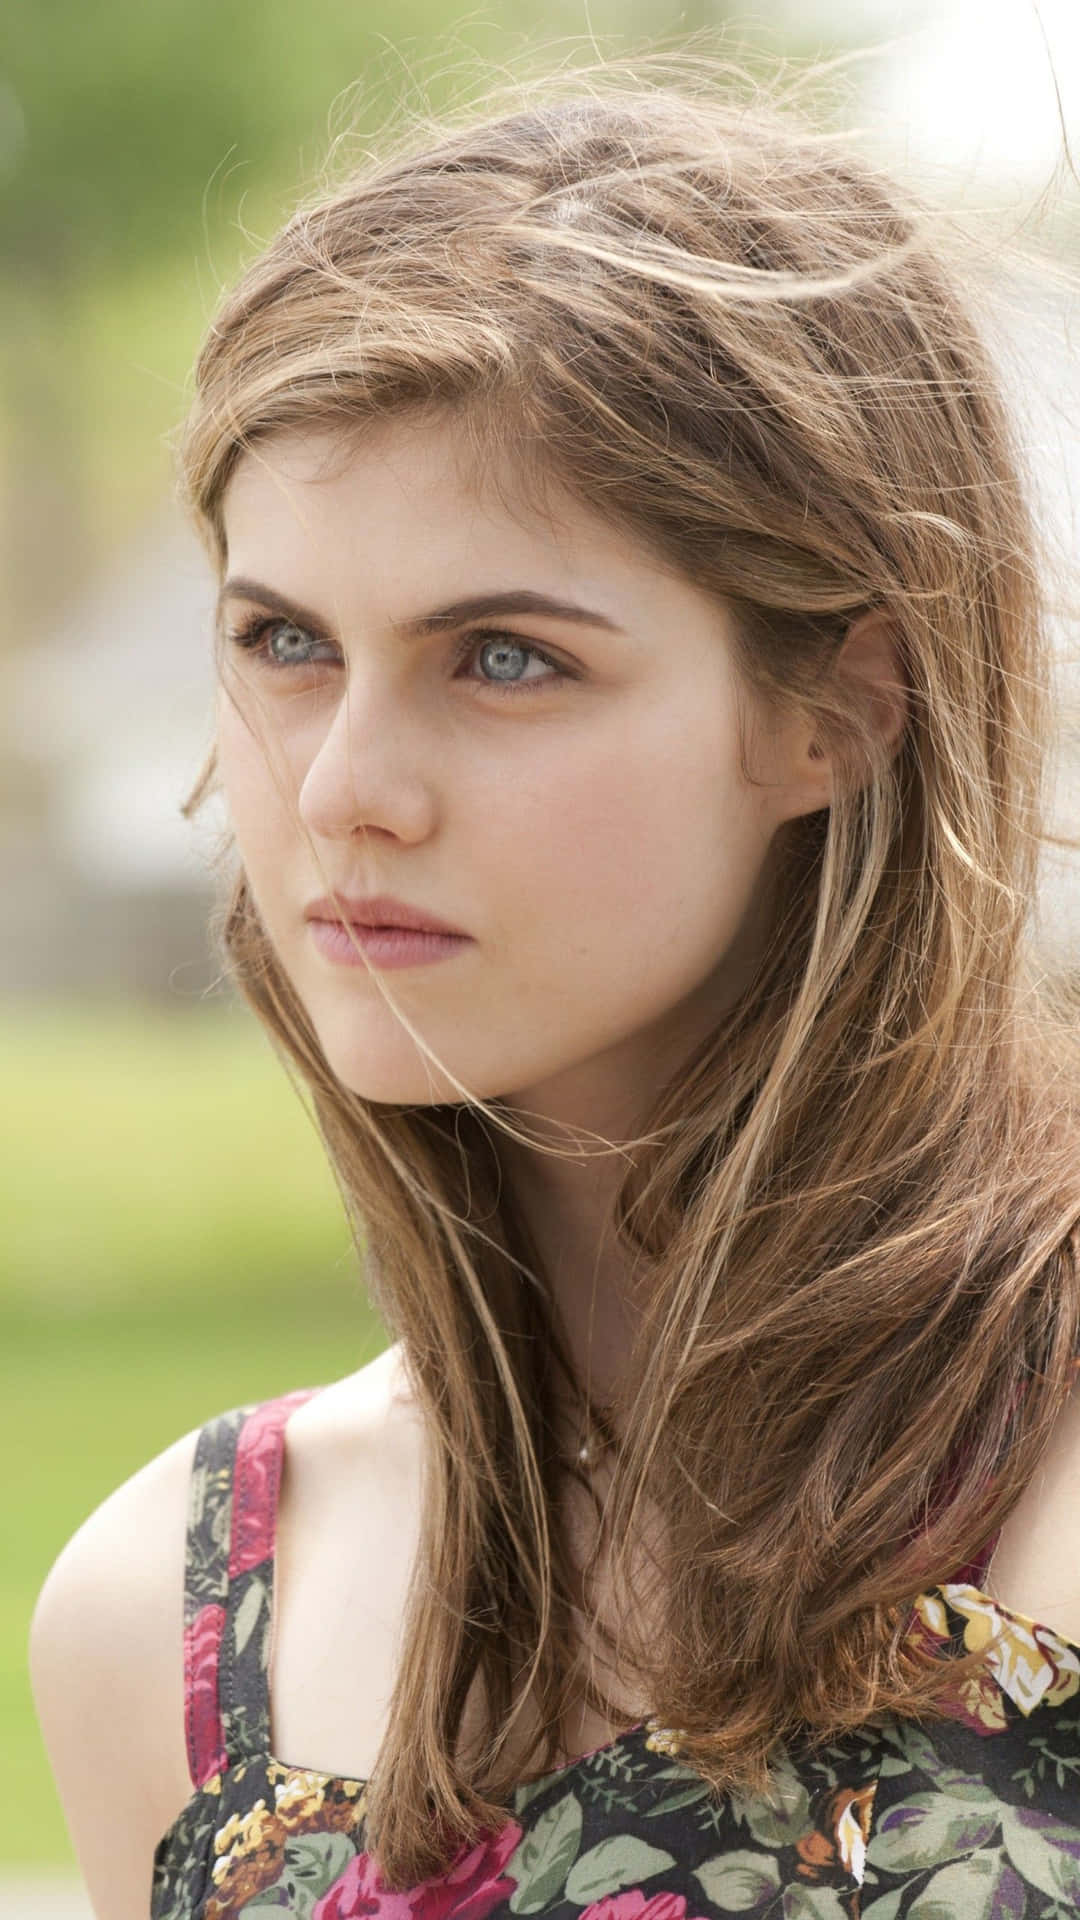 Stunning Alexandra Daddario Poses Elegantly Against a Nature-Inspired Background